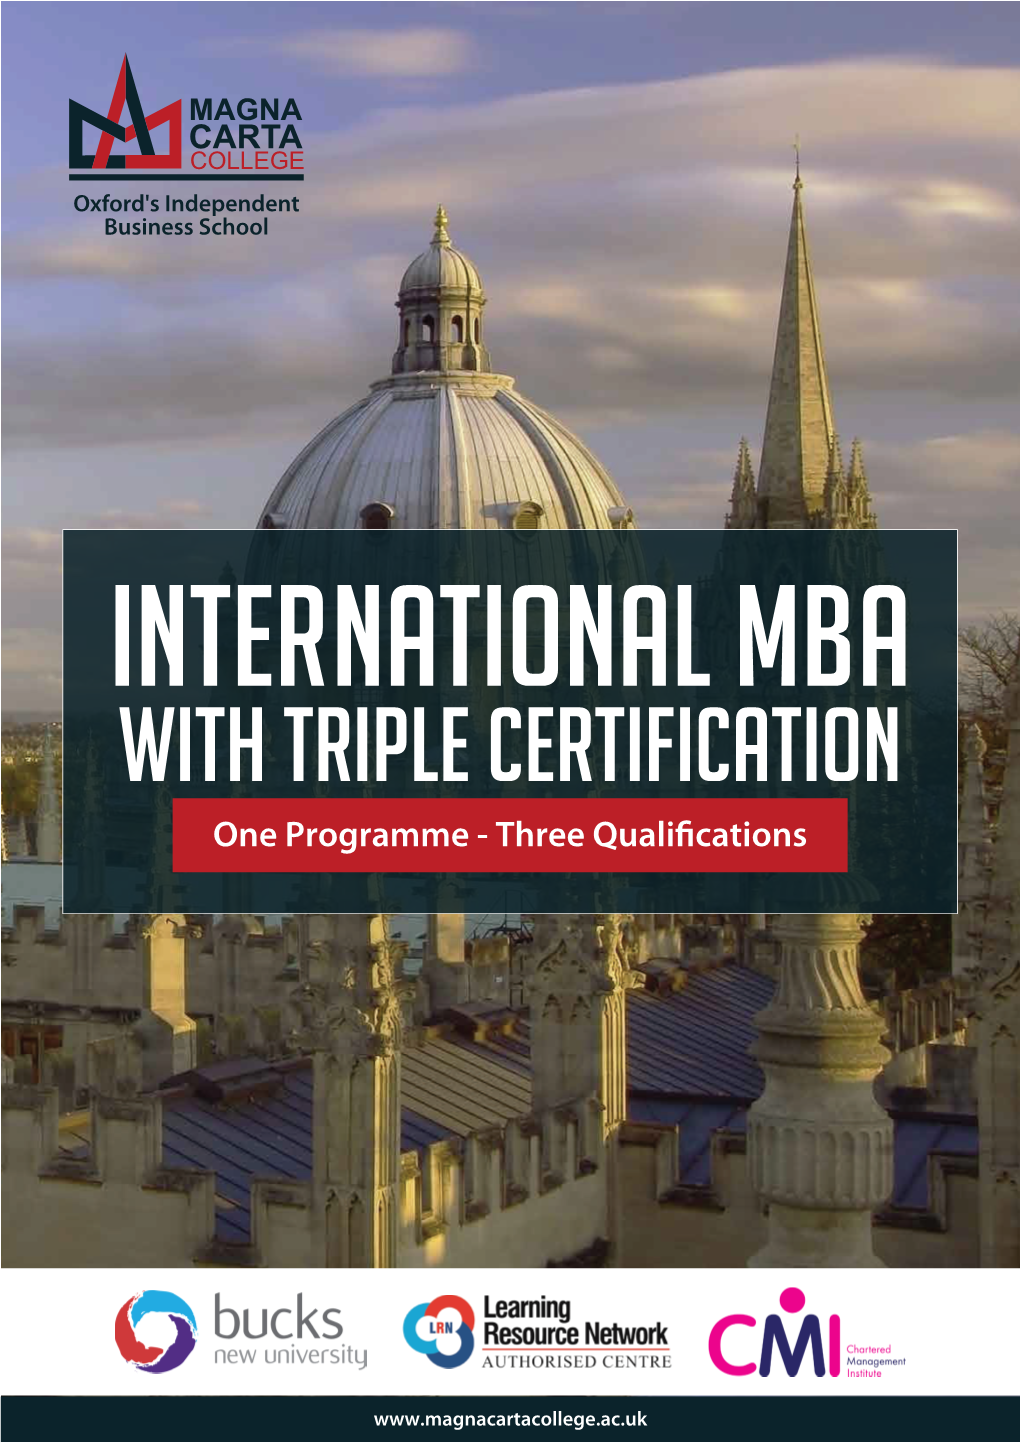 With Triple Certification One Programme - Three Qualifications